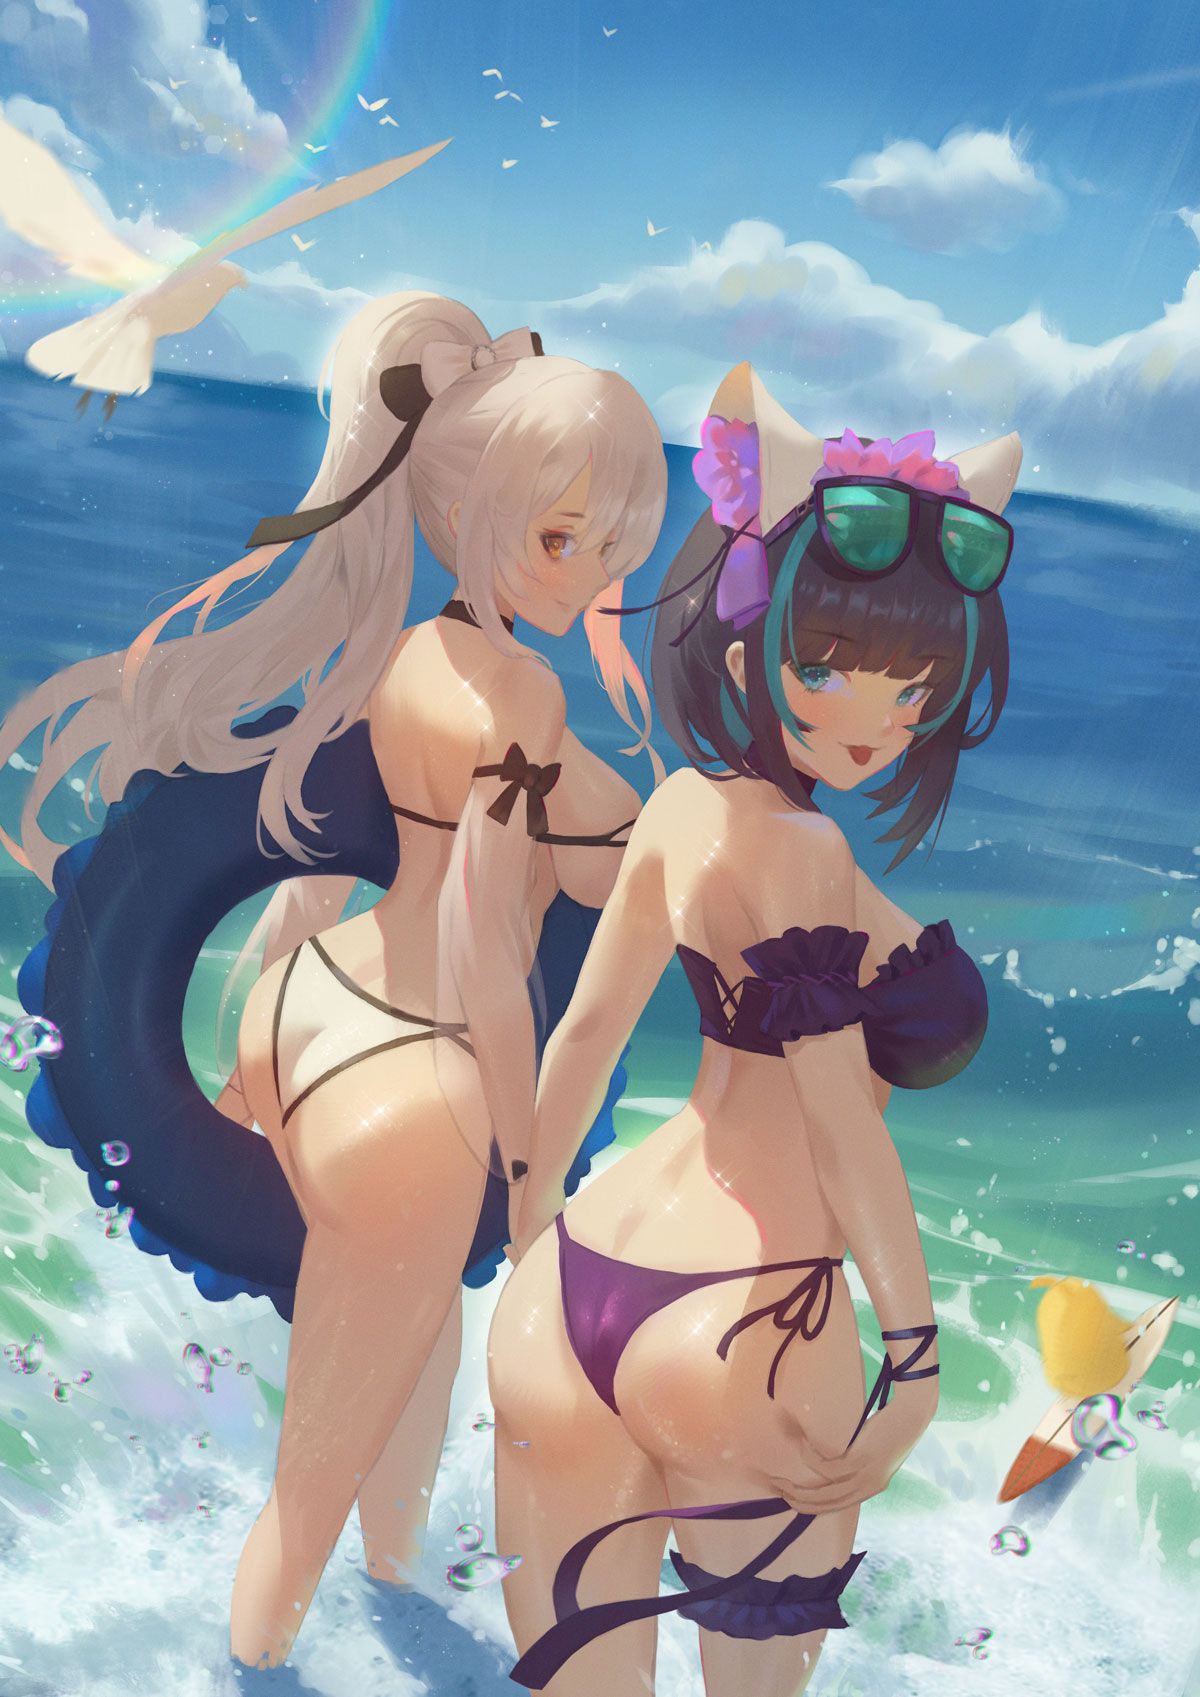 Girls And The Sea 少女与海 158